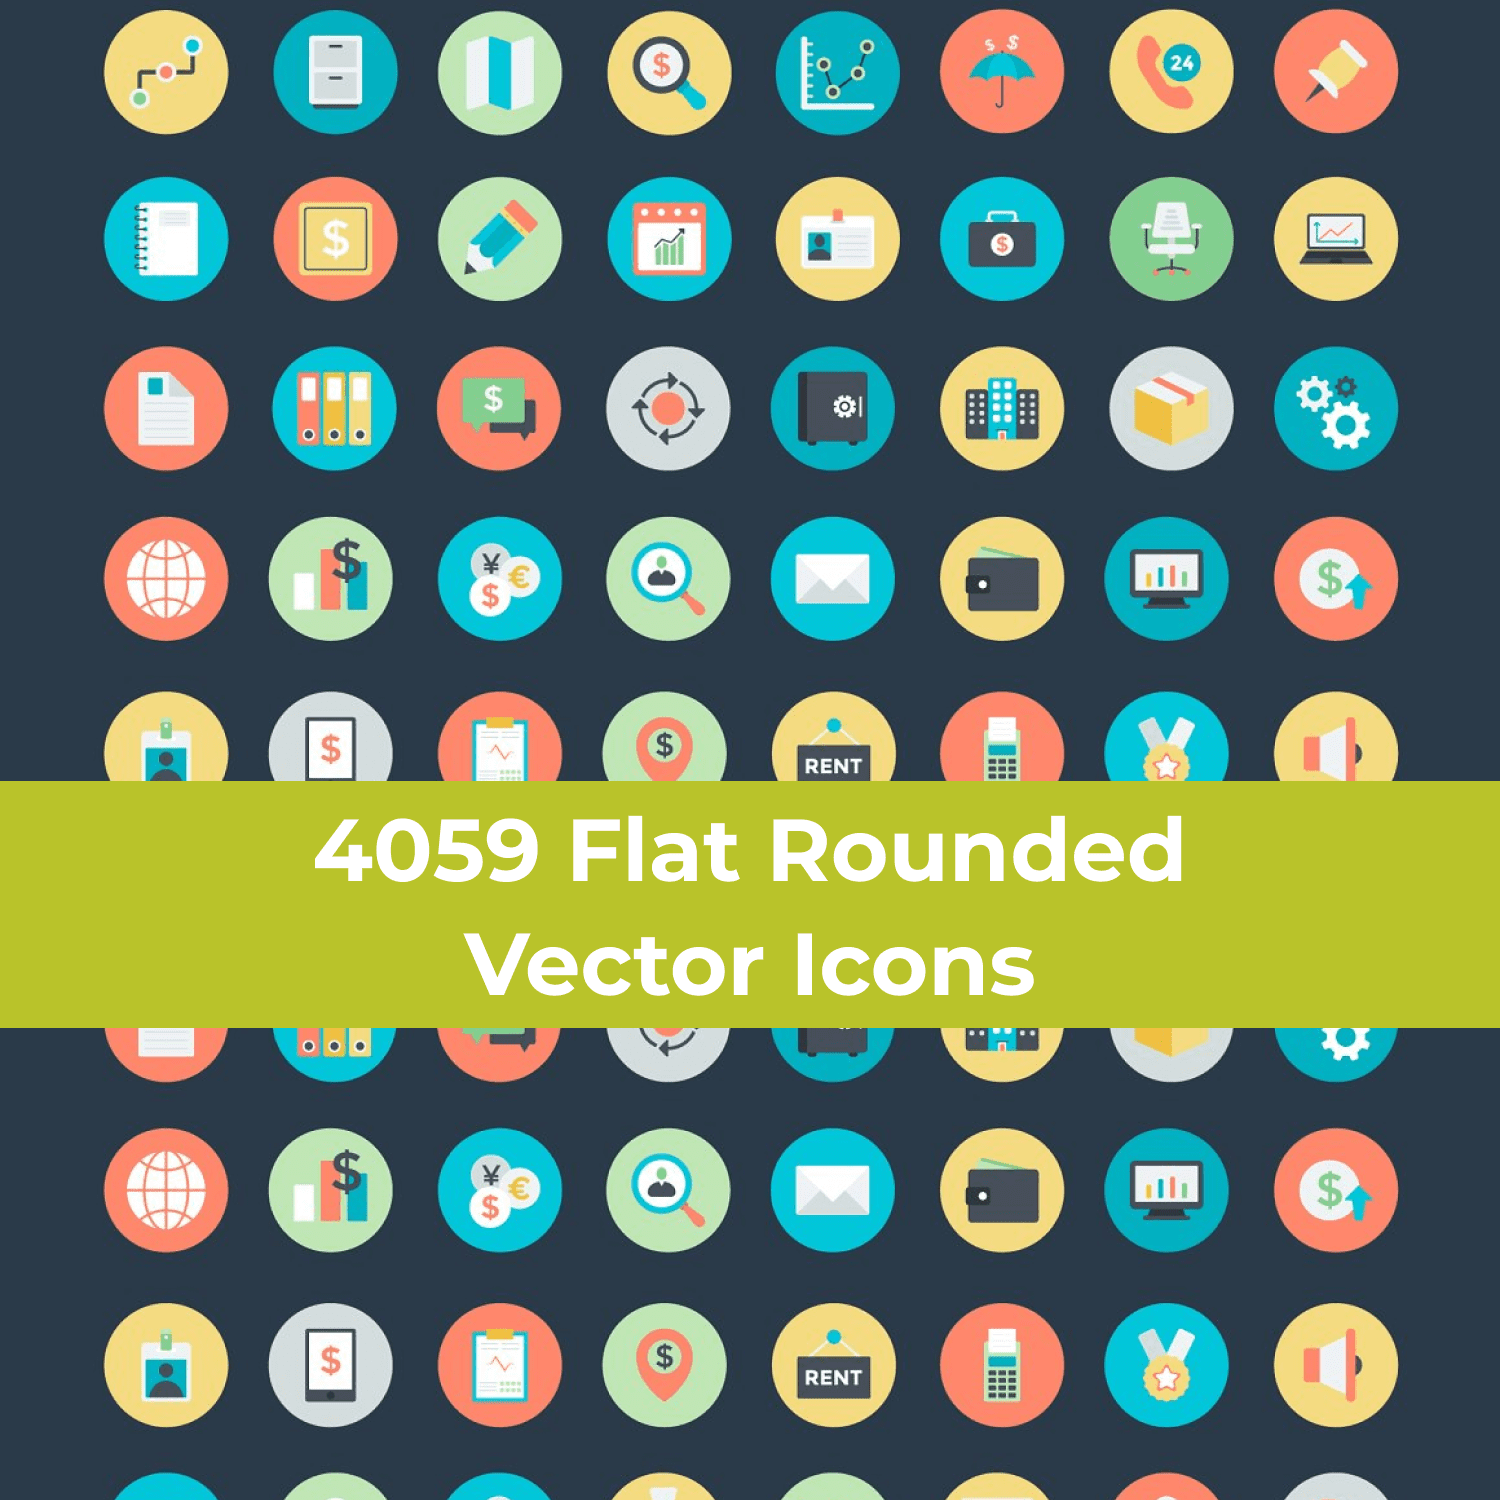 4059 Flat Rounded Vector Icons main cover.